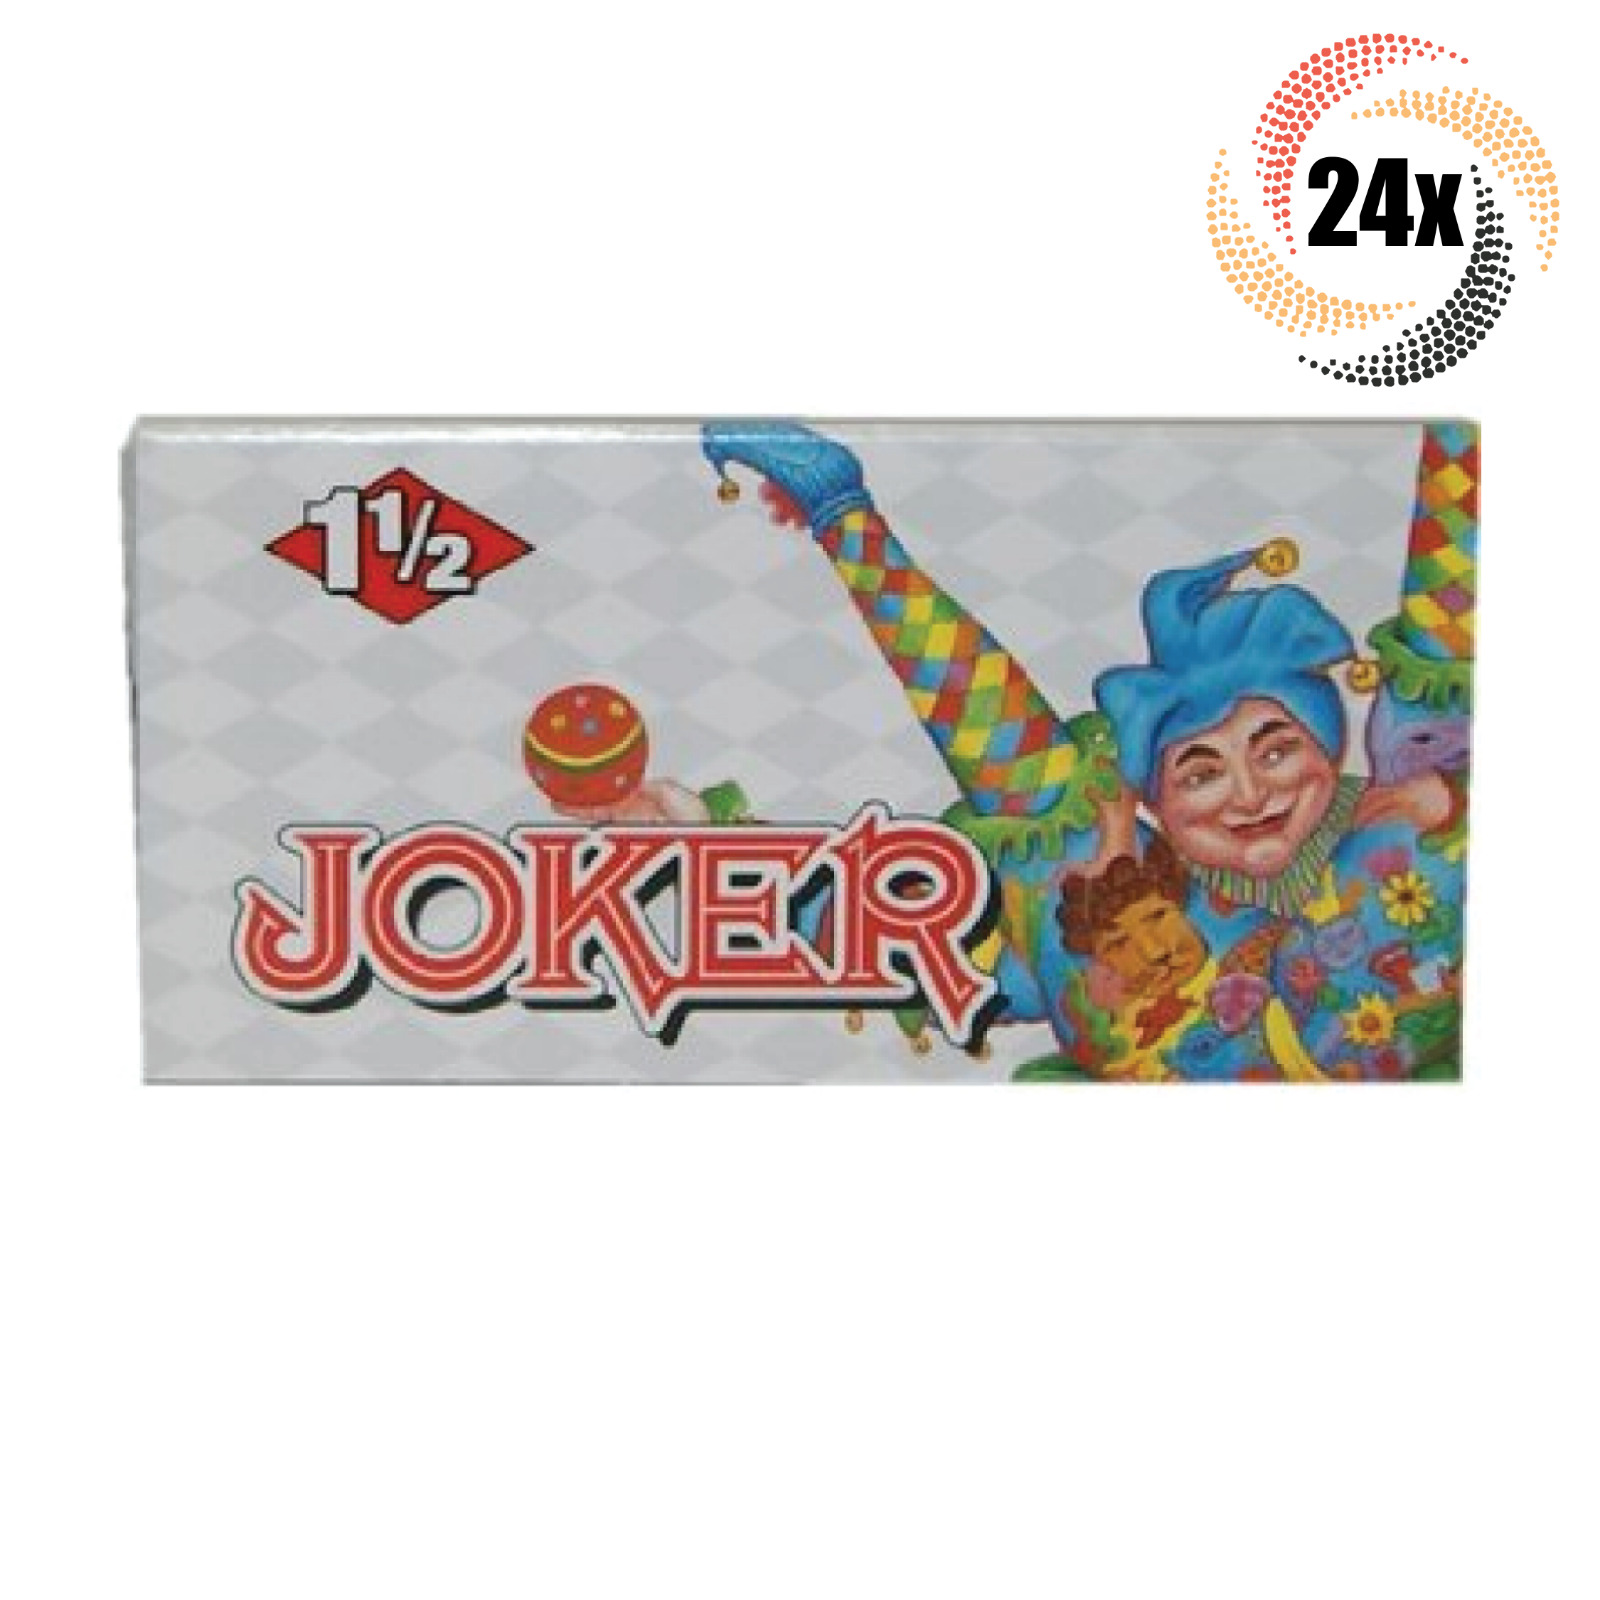 24x Packs Joker Rolling Papers 1 1/2 | 24 Papers Each | + 2 Free Rolling Tubes